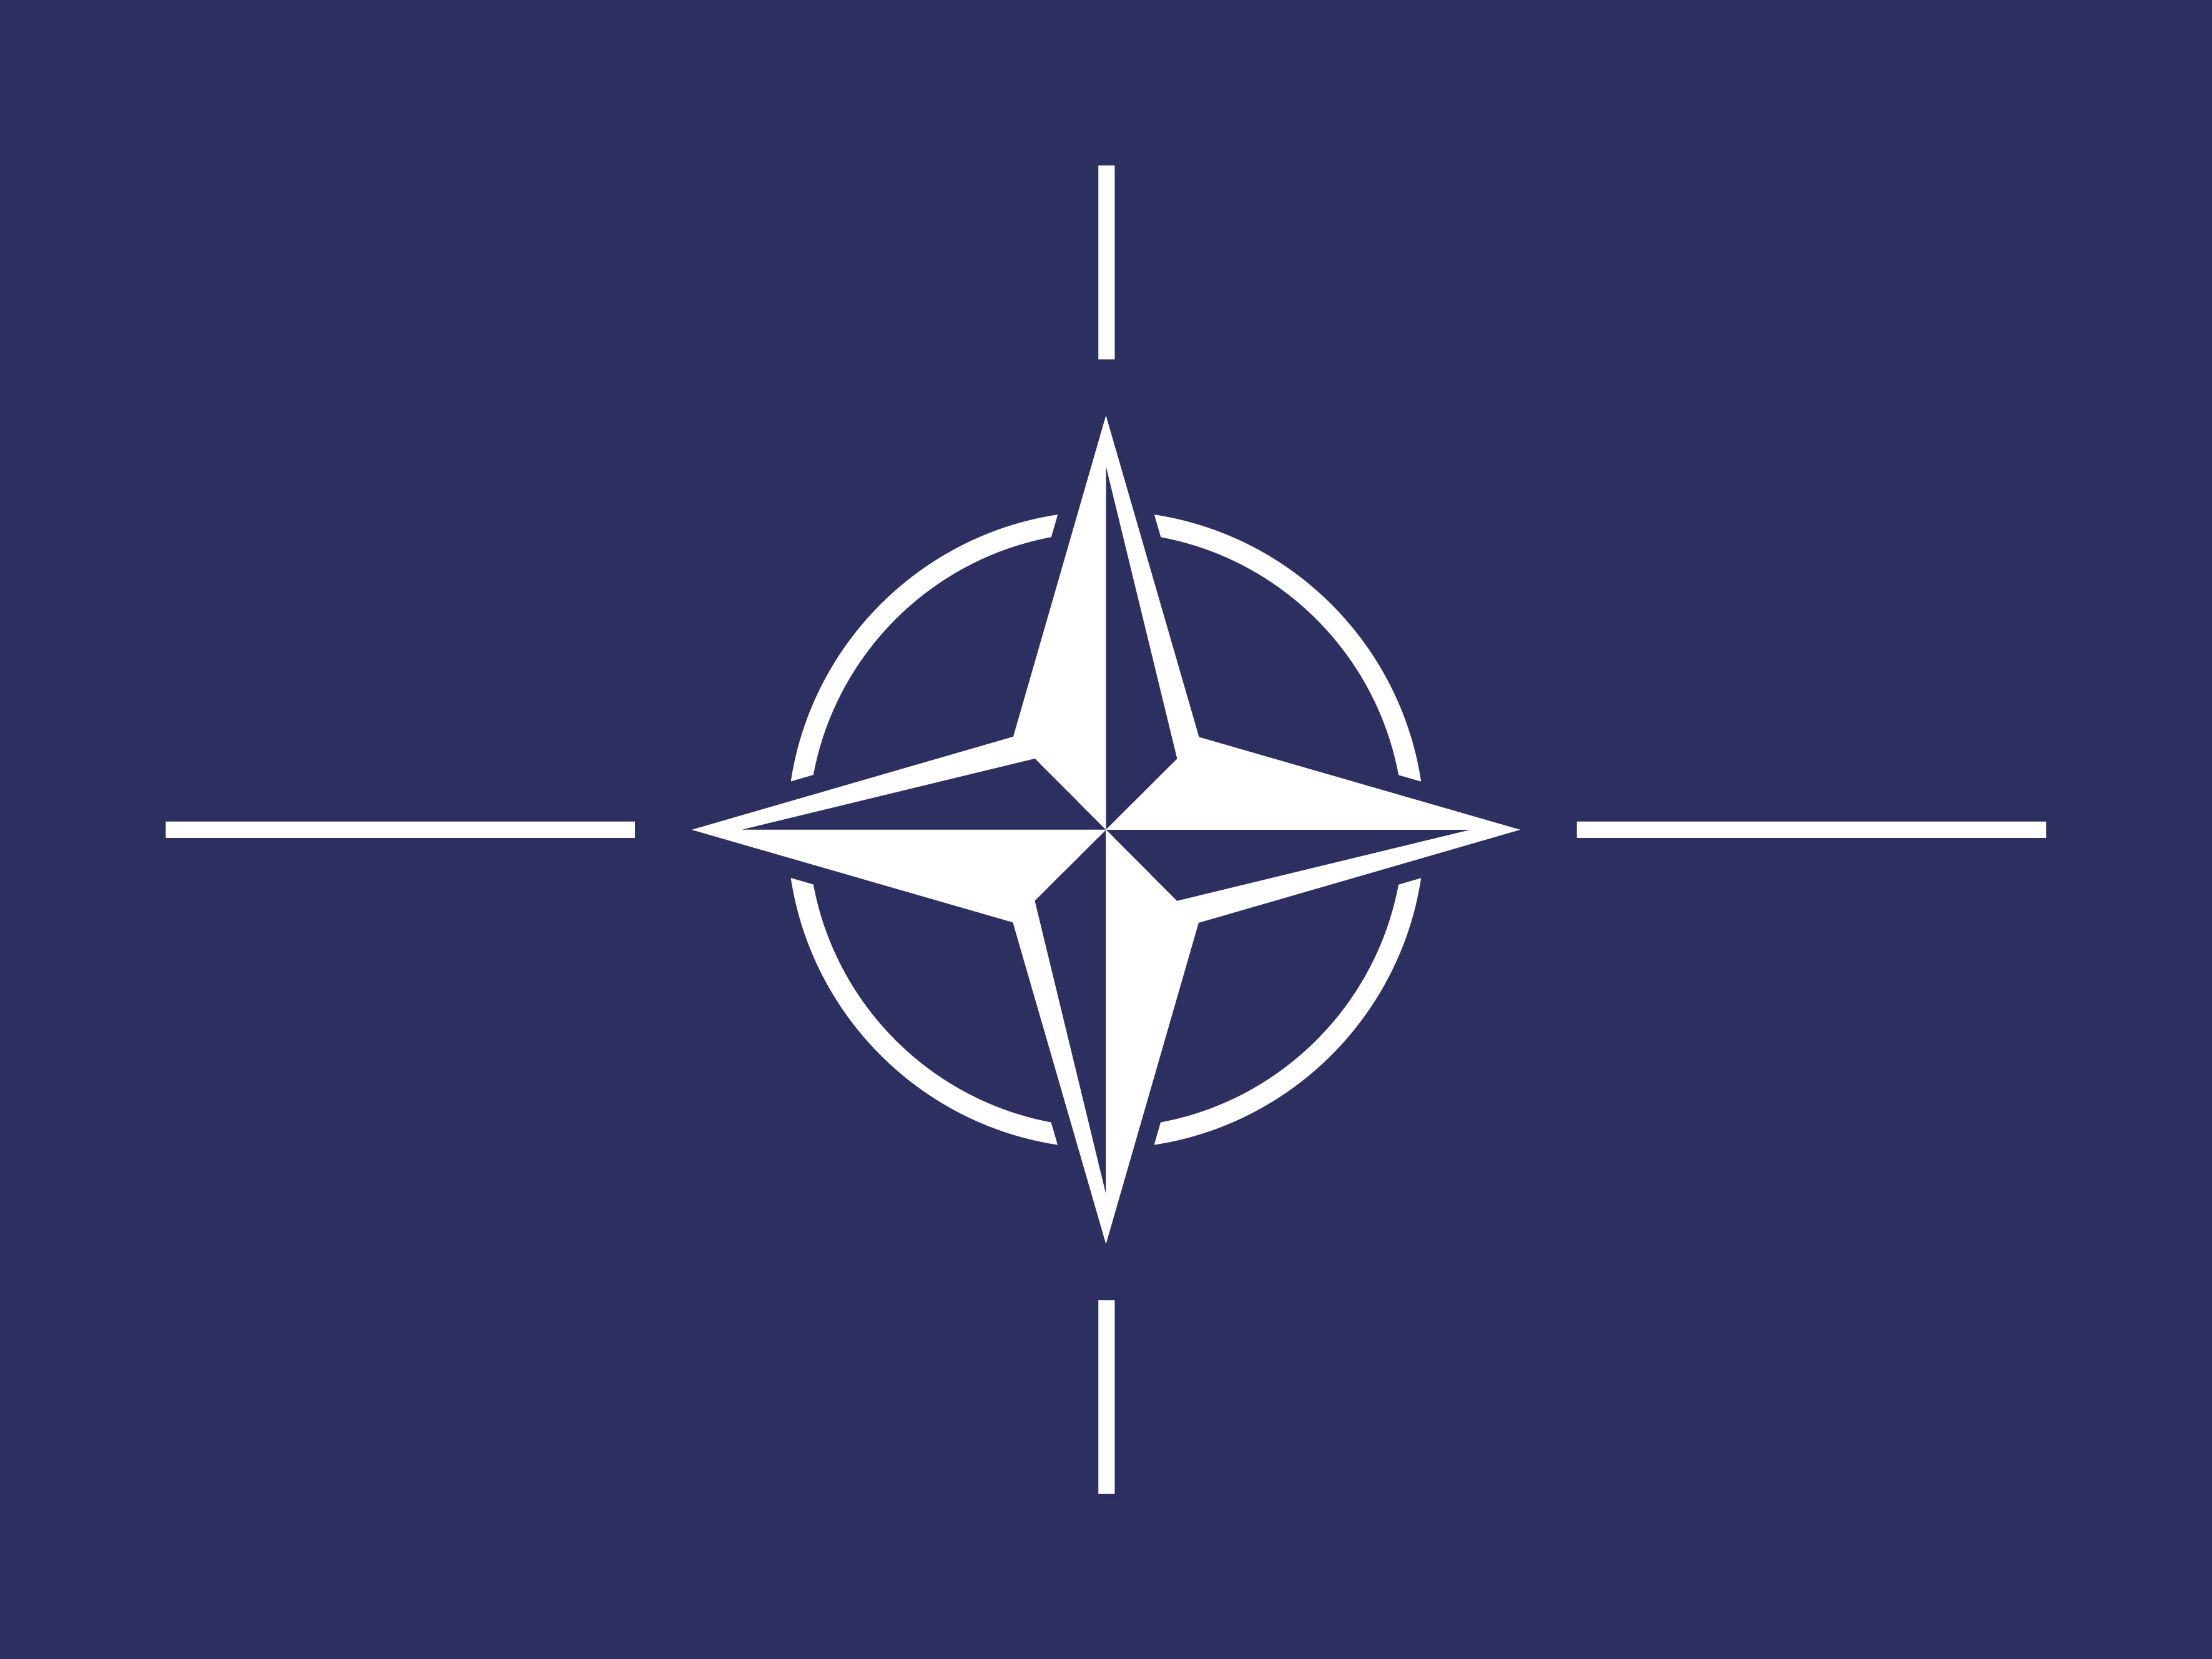 NATO is preparing to establish a space CoE. (Getty Images)